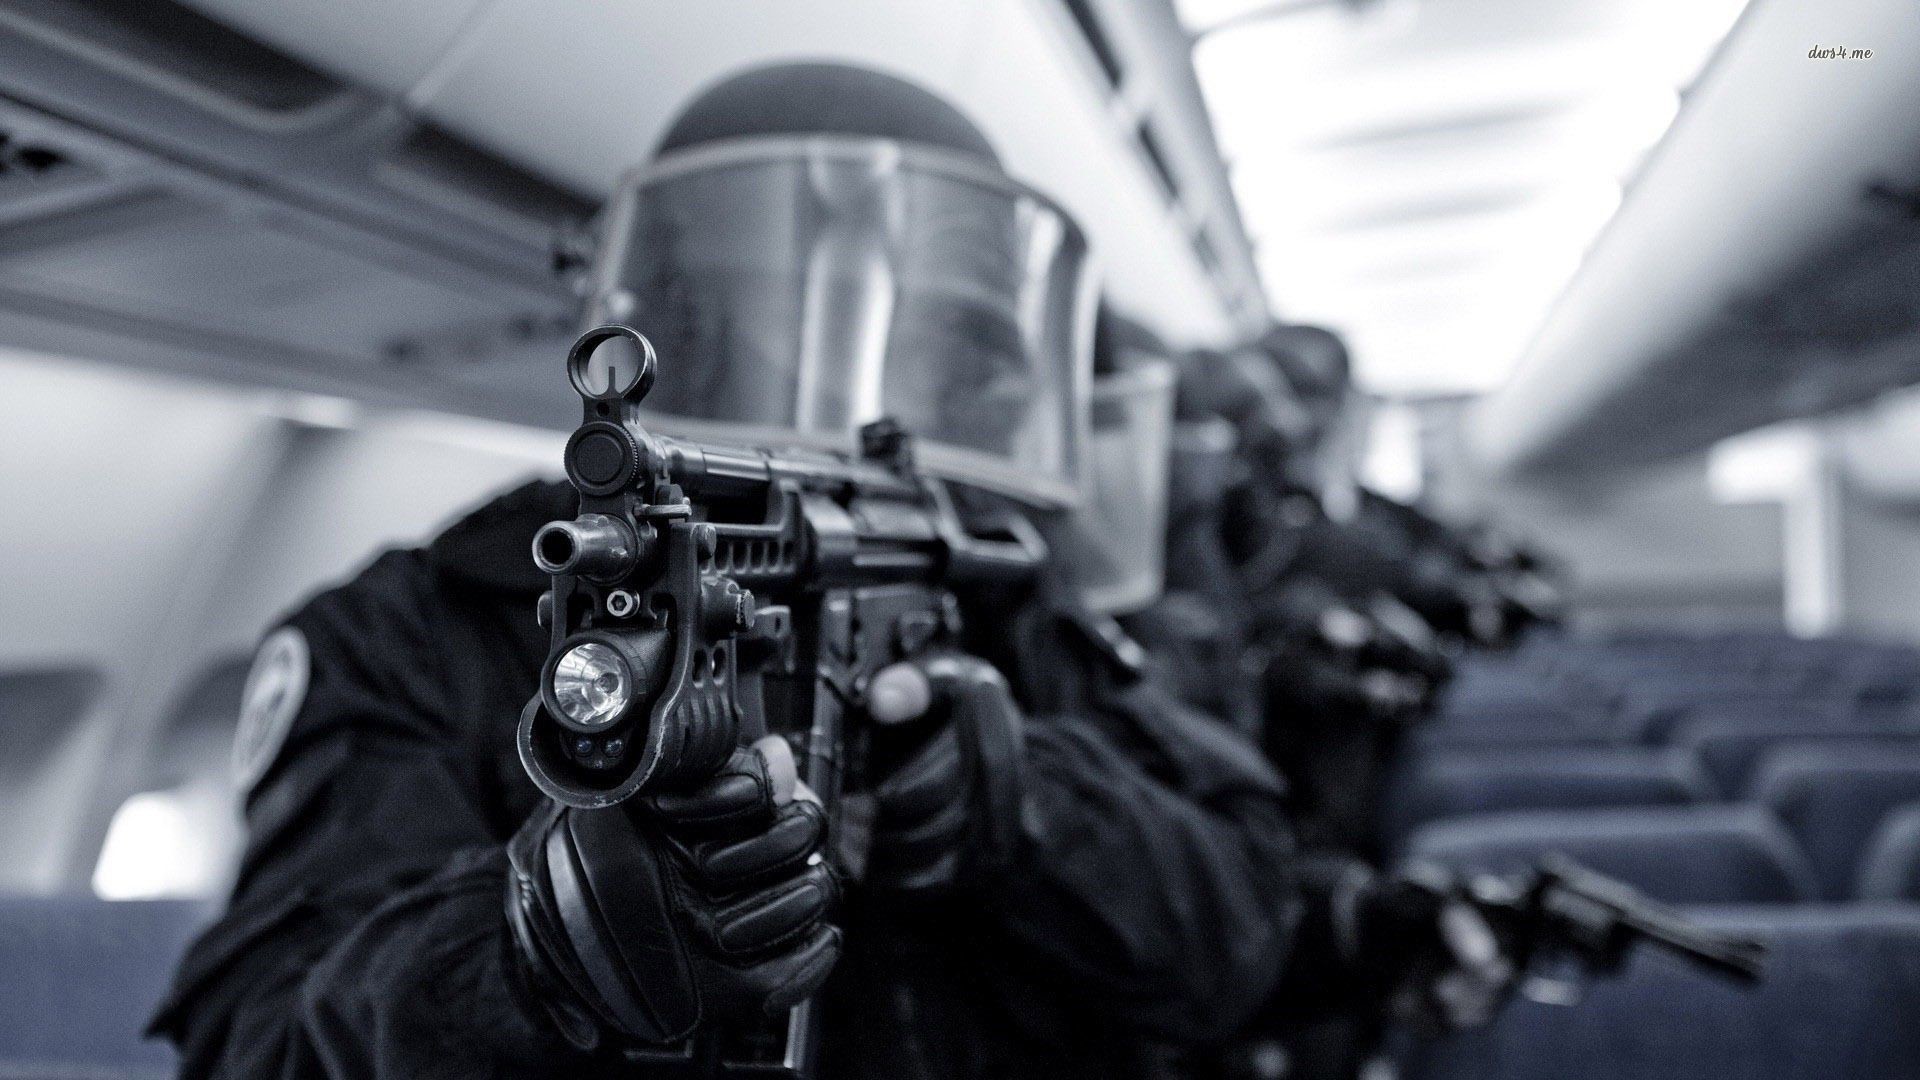 1920x1080 Swat Tactical Wallpapers Photo On Wallpaper 1080p HD